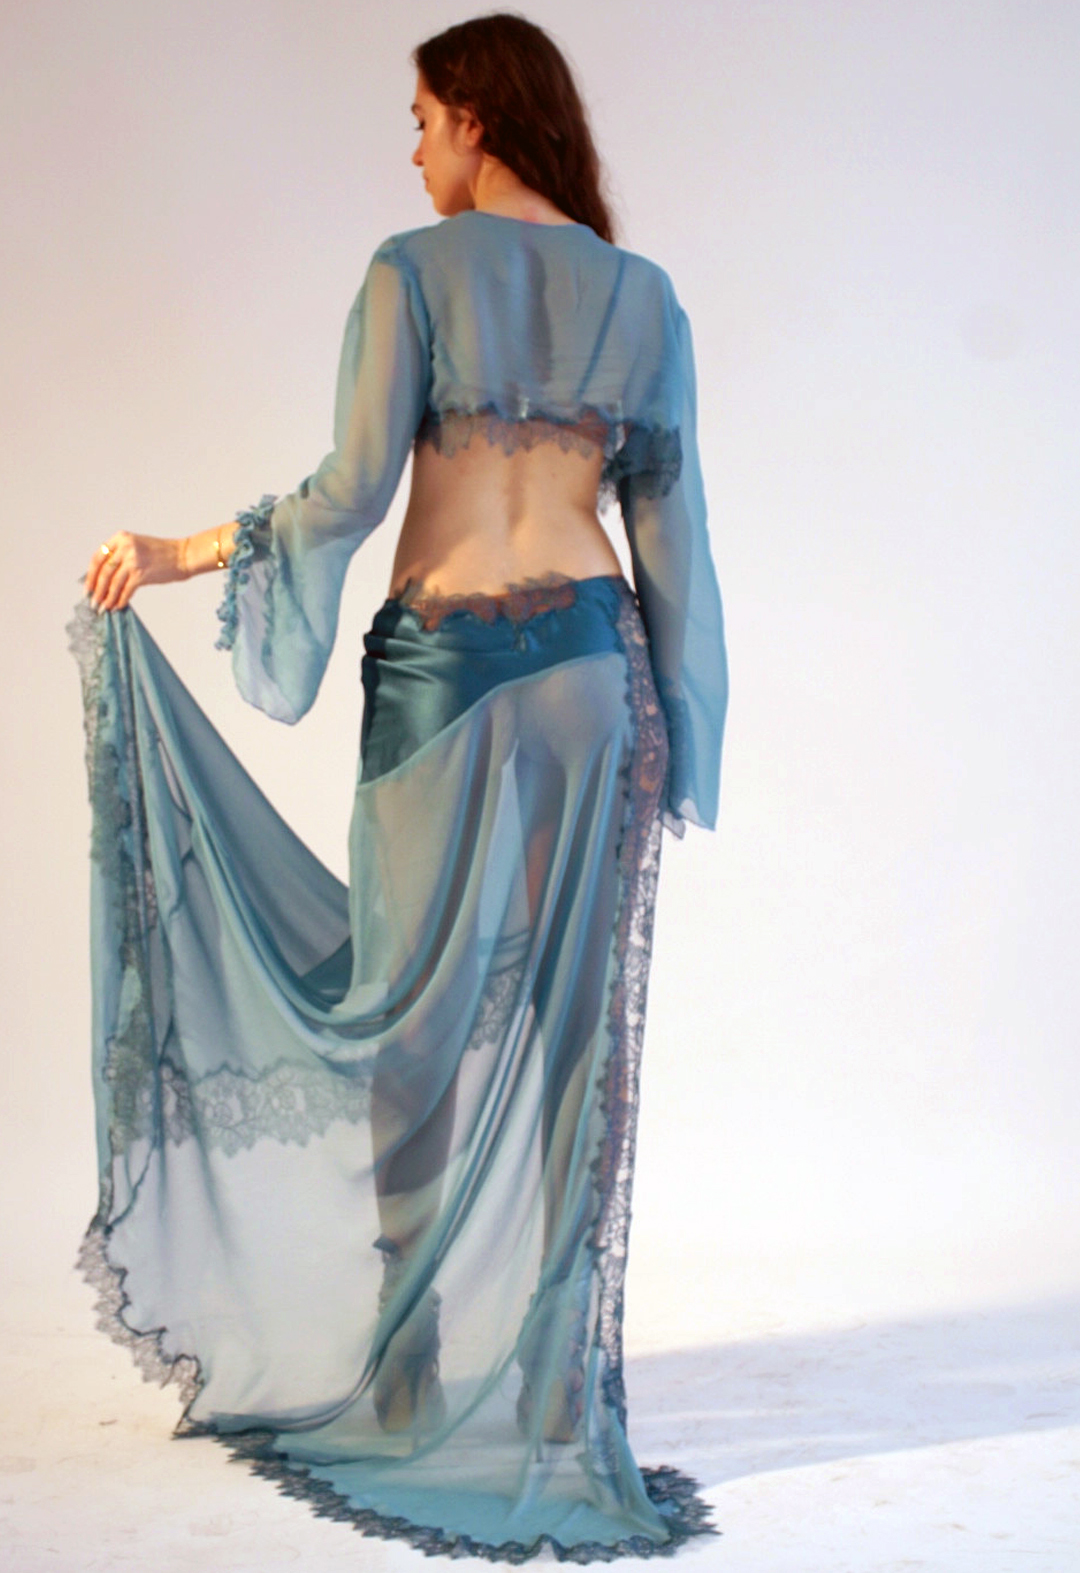 The model is facing away from the camera with her hair down. She is holding the slit of the skirt, giving a draped ripple effect to the flowing chiffon. Her hair is pushed to the right and she is looking down toward her hand. Copper double-layered mesh soft bralette with lace appliqué at the side seam. Gold hardware is used on the clasp on the back, the rings, and the sliders. Deep teal–colored silk adjustable straps hold up the bandeau-like, rounded shape bra. Deep-teal silk skirt. Crepe silk charmeuse asymmetrical yoke, resembling a wave, reveals a built-in cheeky panty within the skirt. The skirt is continued by a long flowy drape of the same colored silk in chiffon. The skirt has a slit and is hemmed with hand-dyed lace, cut asymmetrically, to resemble abstract oceanic features. There is a cropped chiffon bed jacket, as a two-in-one cover-up. The jacket has a slit at each sleeve, and the slit has a purled edge ruffle at each side of the slit. Hemmed with hand-dyed lace cut asymmetrically, to resemble abstract oceanic features. 